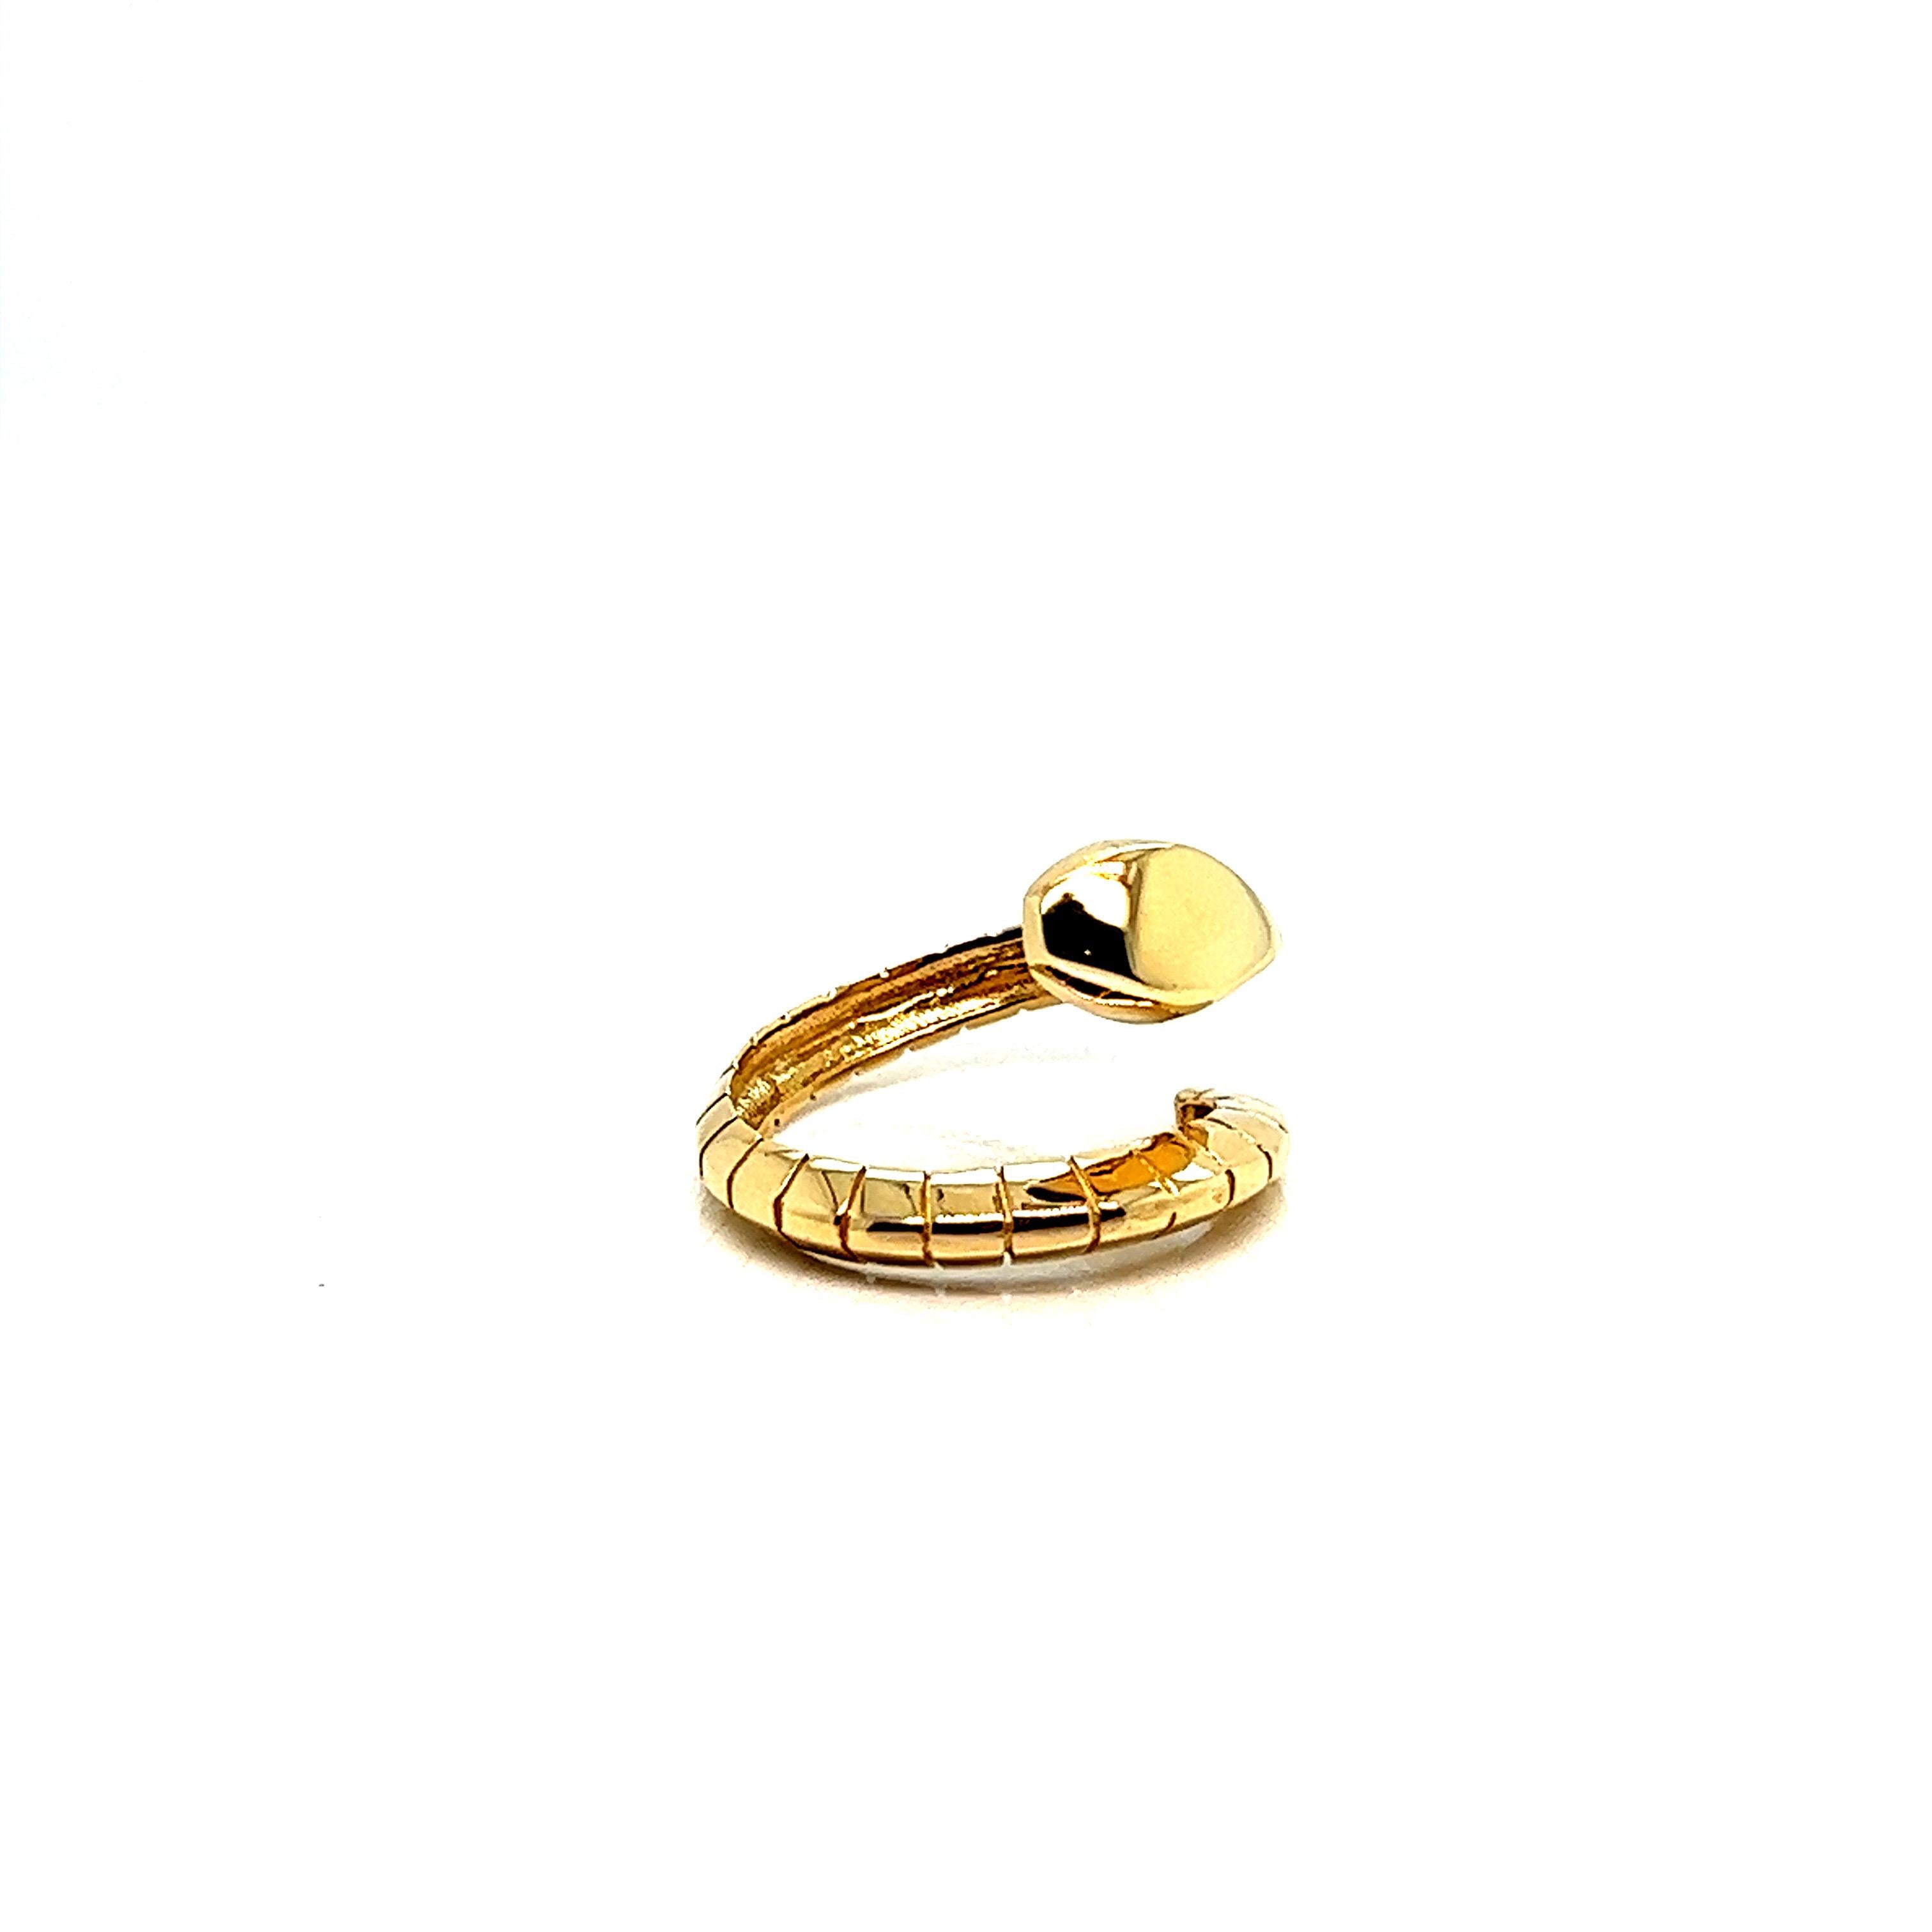 Discover this magnificent snake ring in 18-carat yellow gold, a jewel that combines elegance with a touch of the exotic. This ring perfectly embodies the bold, wild style that will add a unique allure to your look.

Made with exceptional